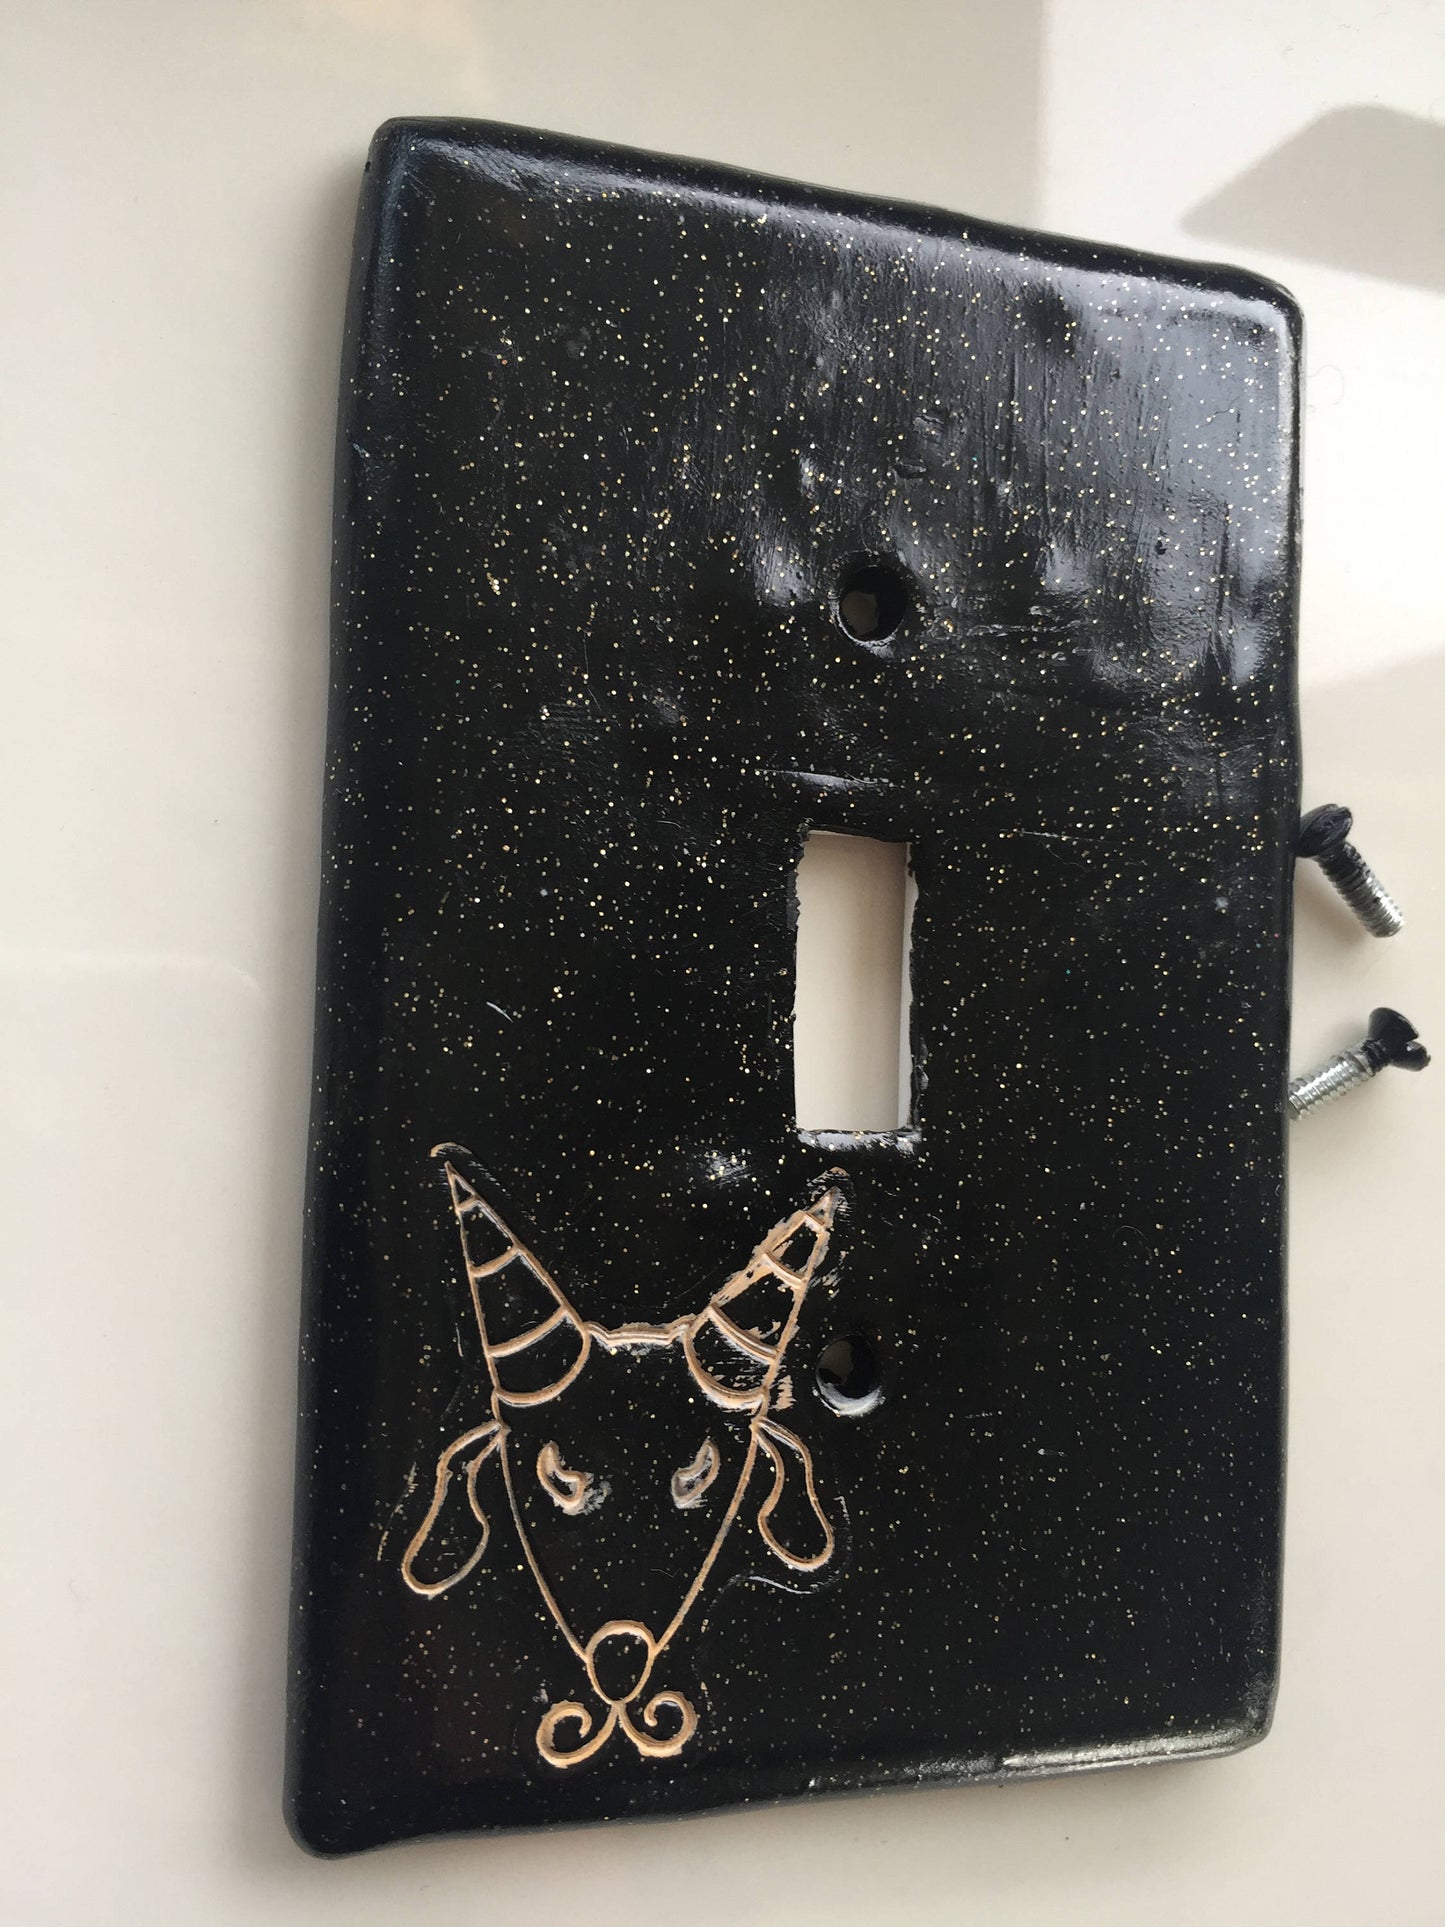 Capricorn The Goat Light switchplate cover for single toggle plate switch plate cover black with gold glitter 10th sign of the zodiac